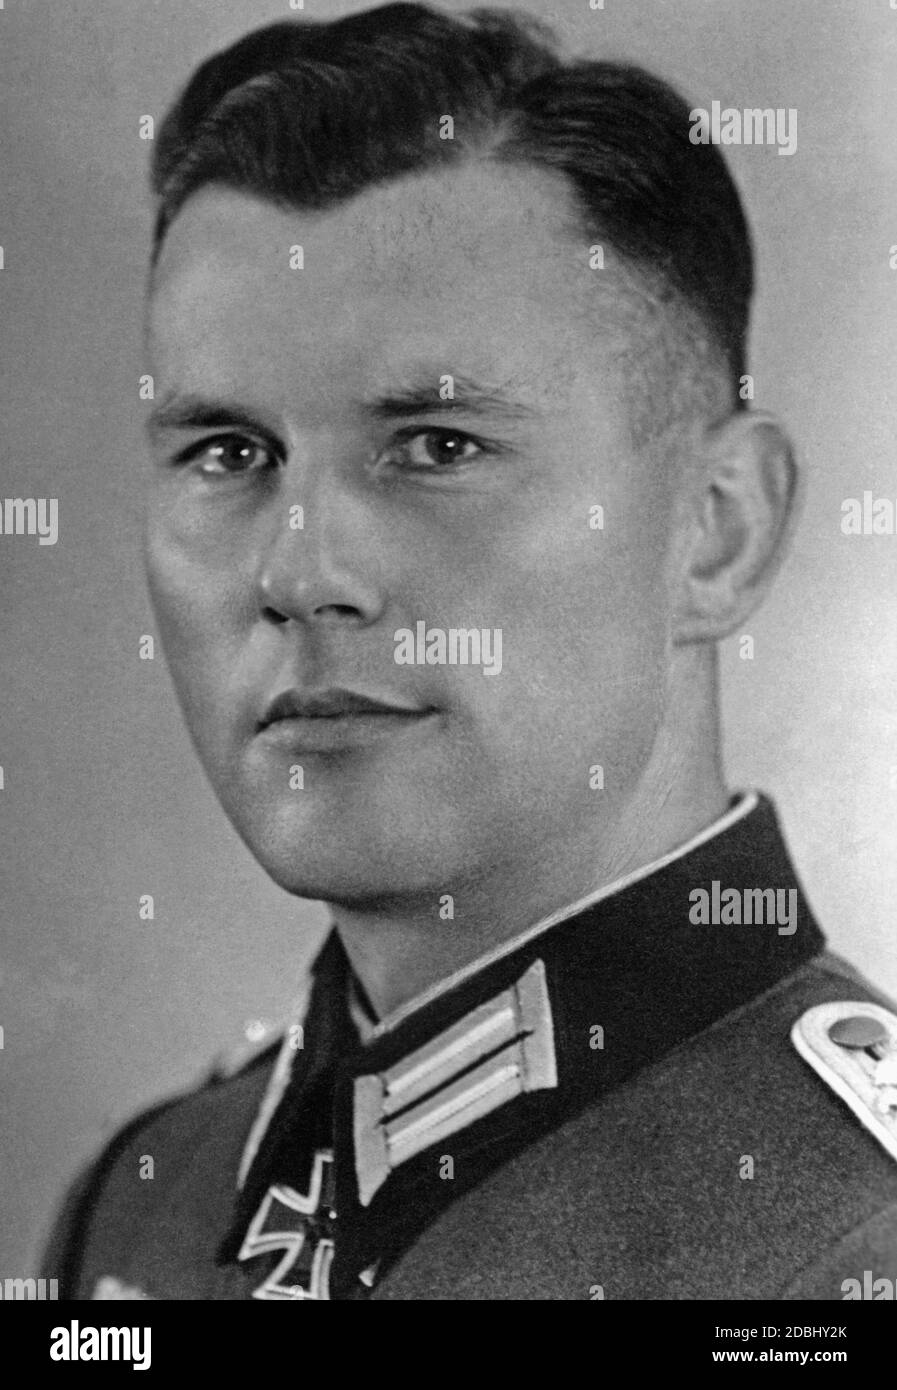 First Lieutenant Paul Dowerk, 5th Infantry Regiment 215 with the Knight's Cross, 1942. The date indicates the bestowal date. Stock Photo